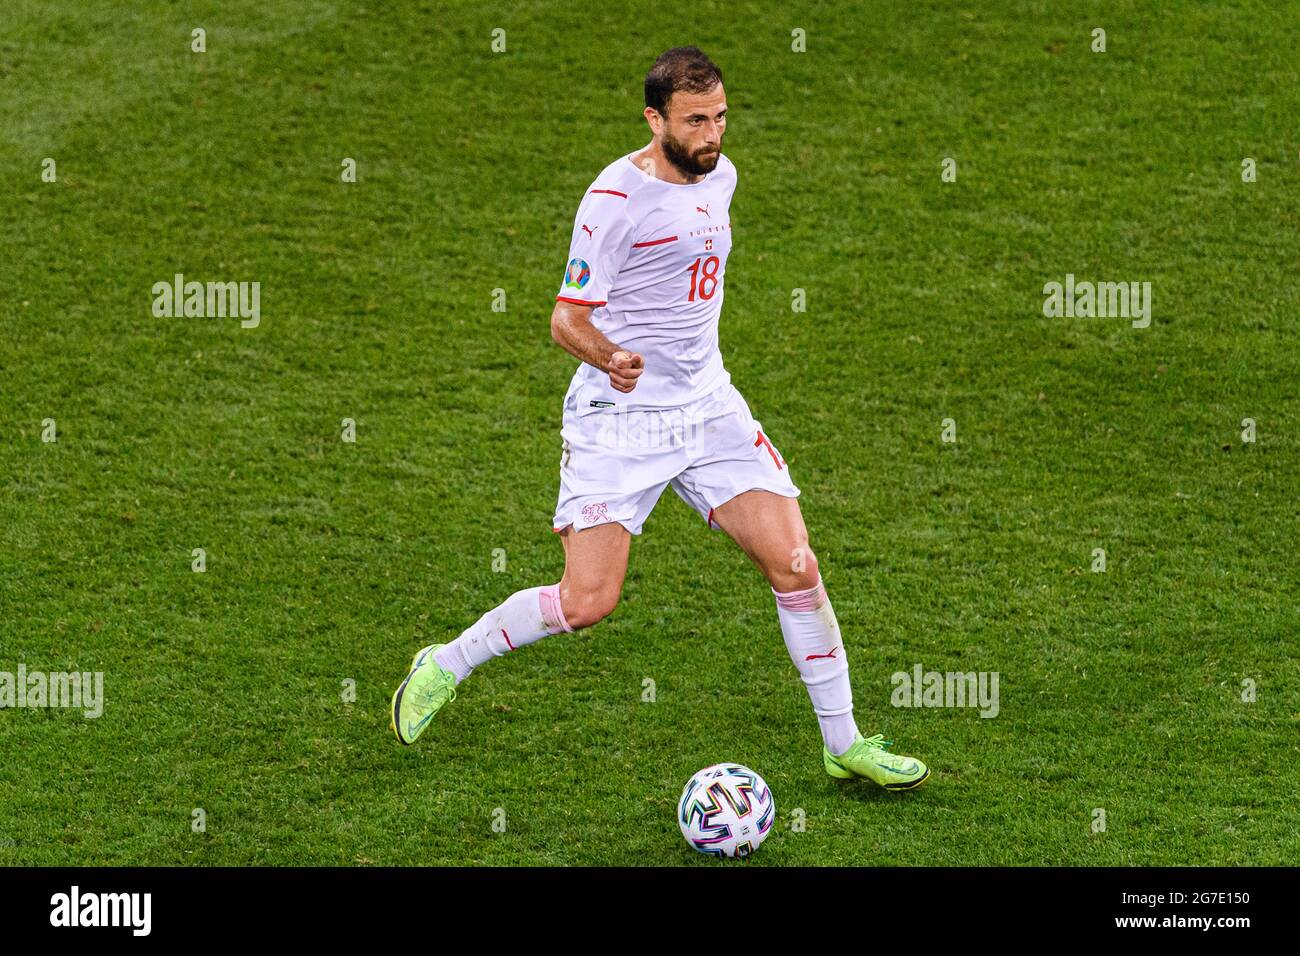 Bucharest, Romania - 28, June: Admir Mehmedi of Switzerland runs with the ball during the UEFA Euro 2020 Championship Round of 16 match between France Stock Photo